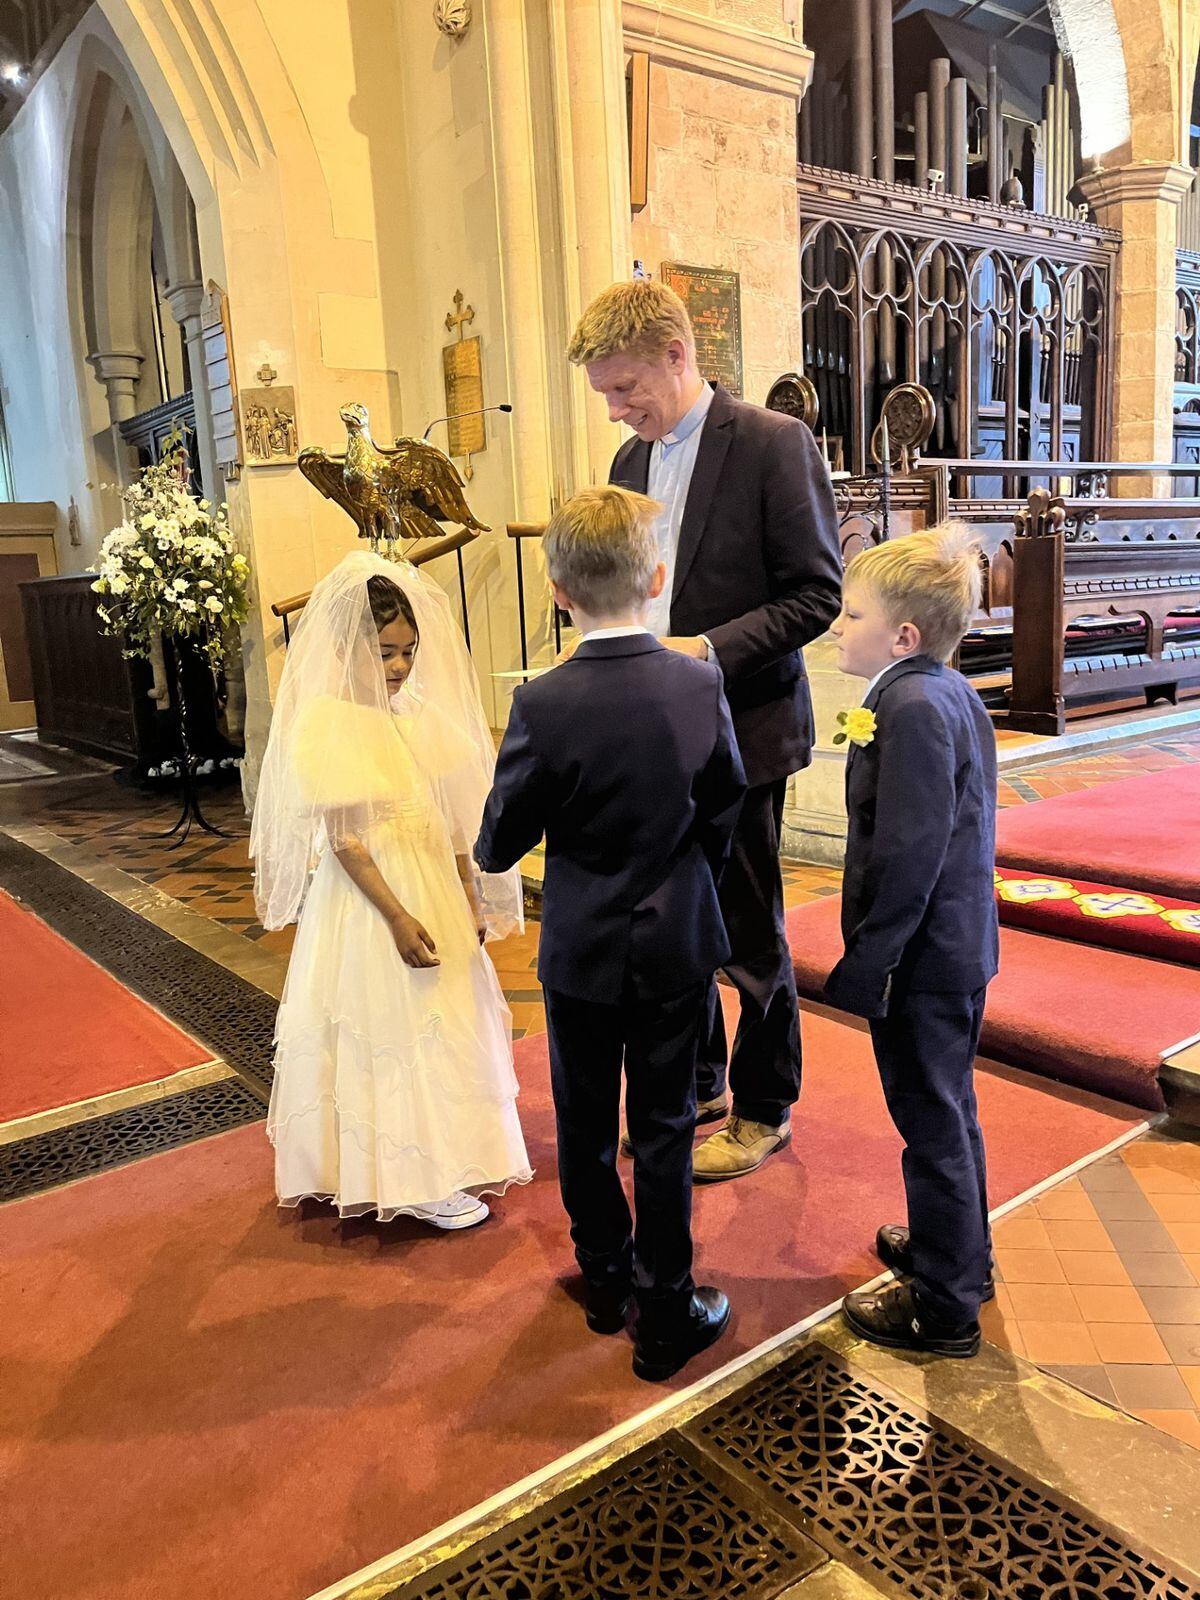 The Year Two pupils took part in the celebration to learn about the Christian faith. Photo: Oswestry School at Bellan House